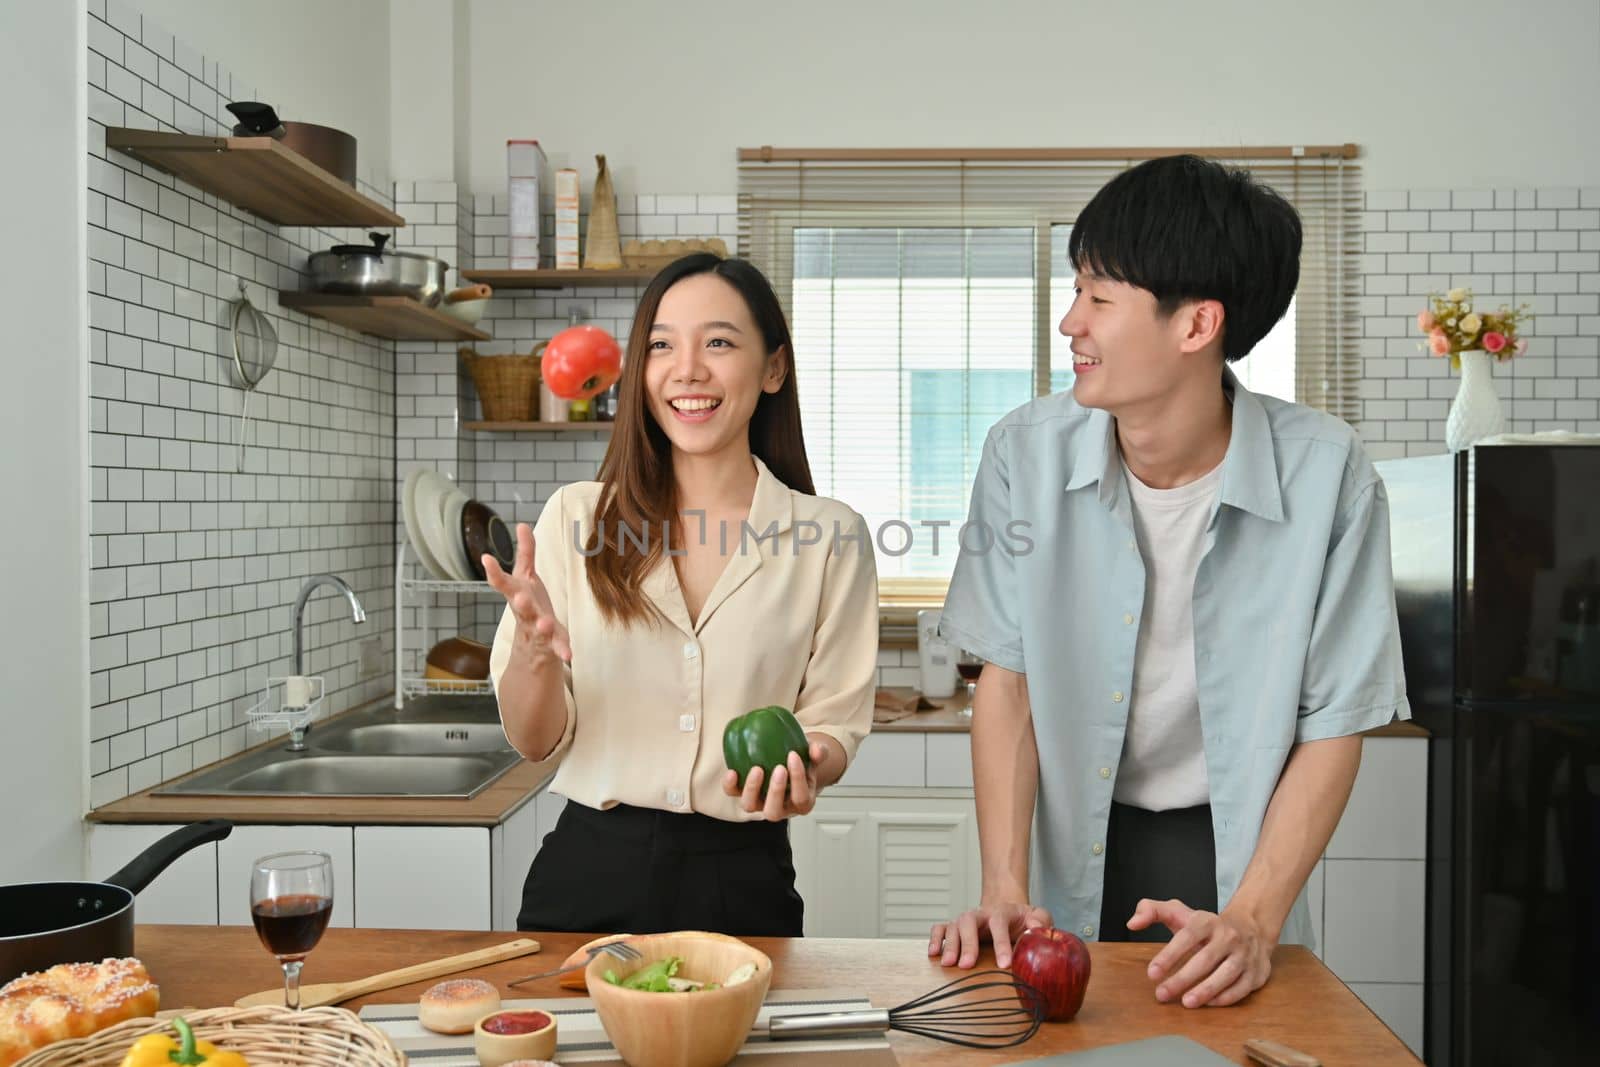 Adorable young couple enjoying spending time together while cooking in modern kitchen.